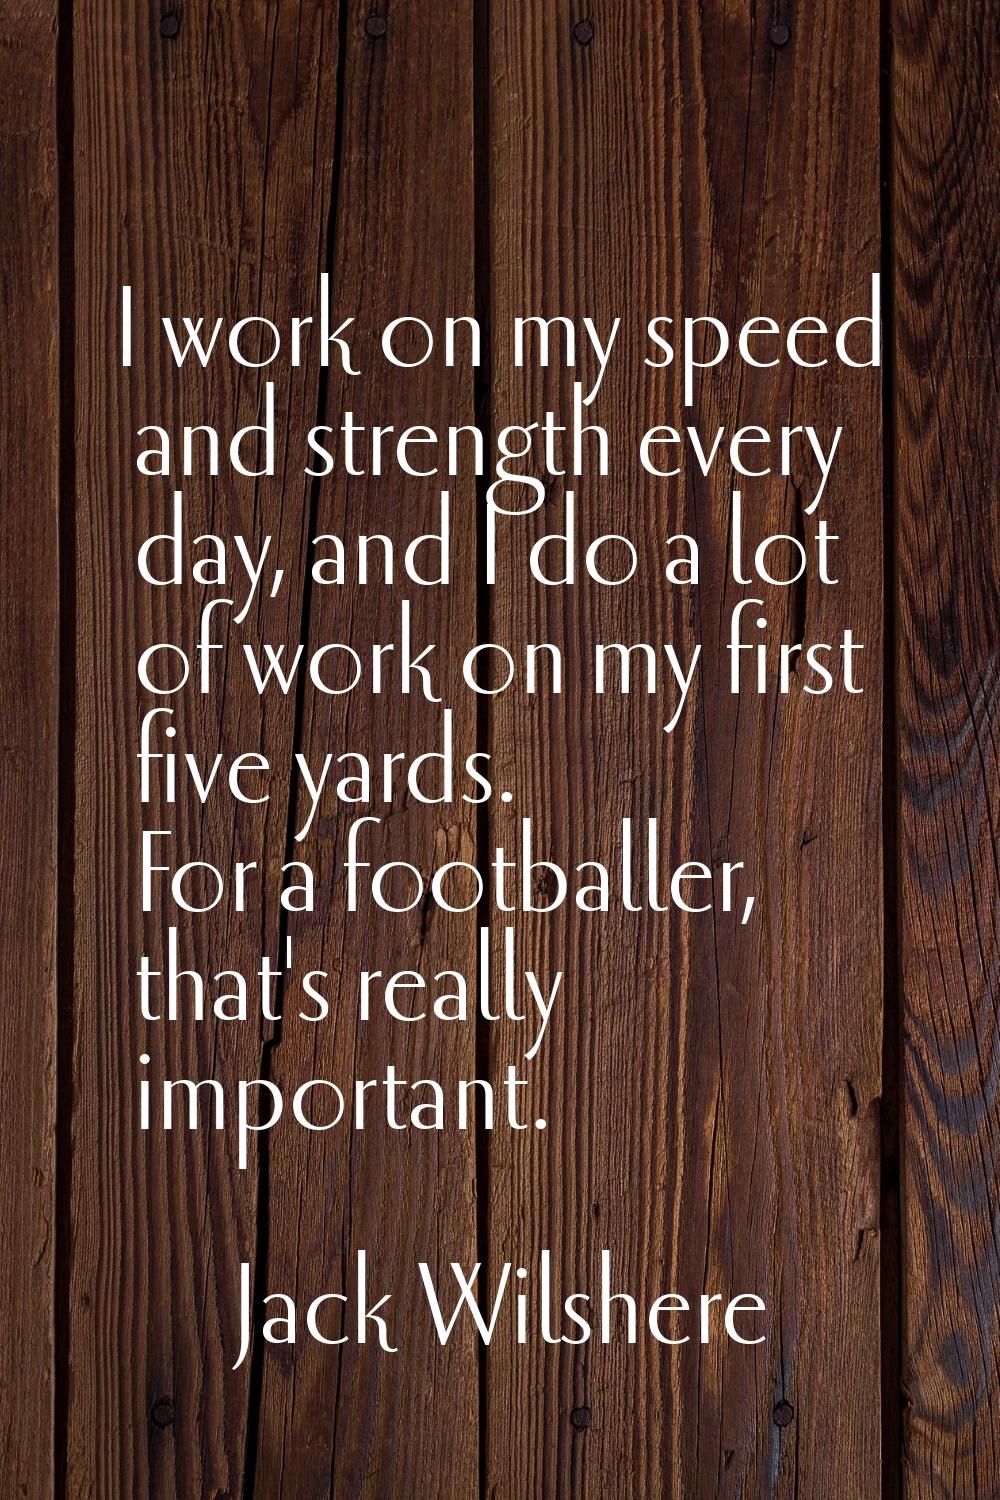 I work on my speed and strength every day, and I do a lot of work on my first five yards. For a foo